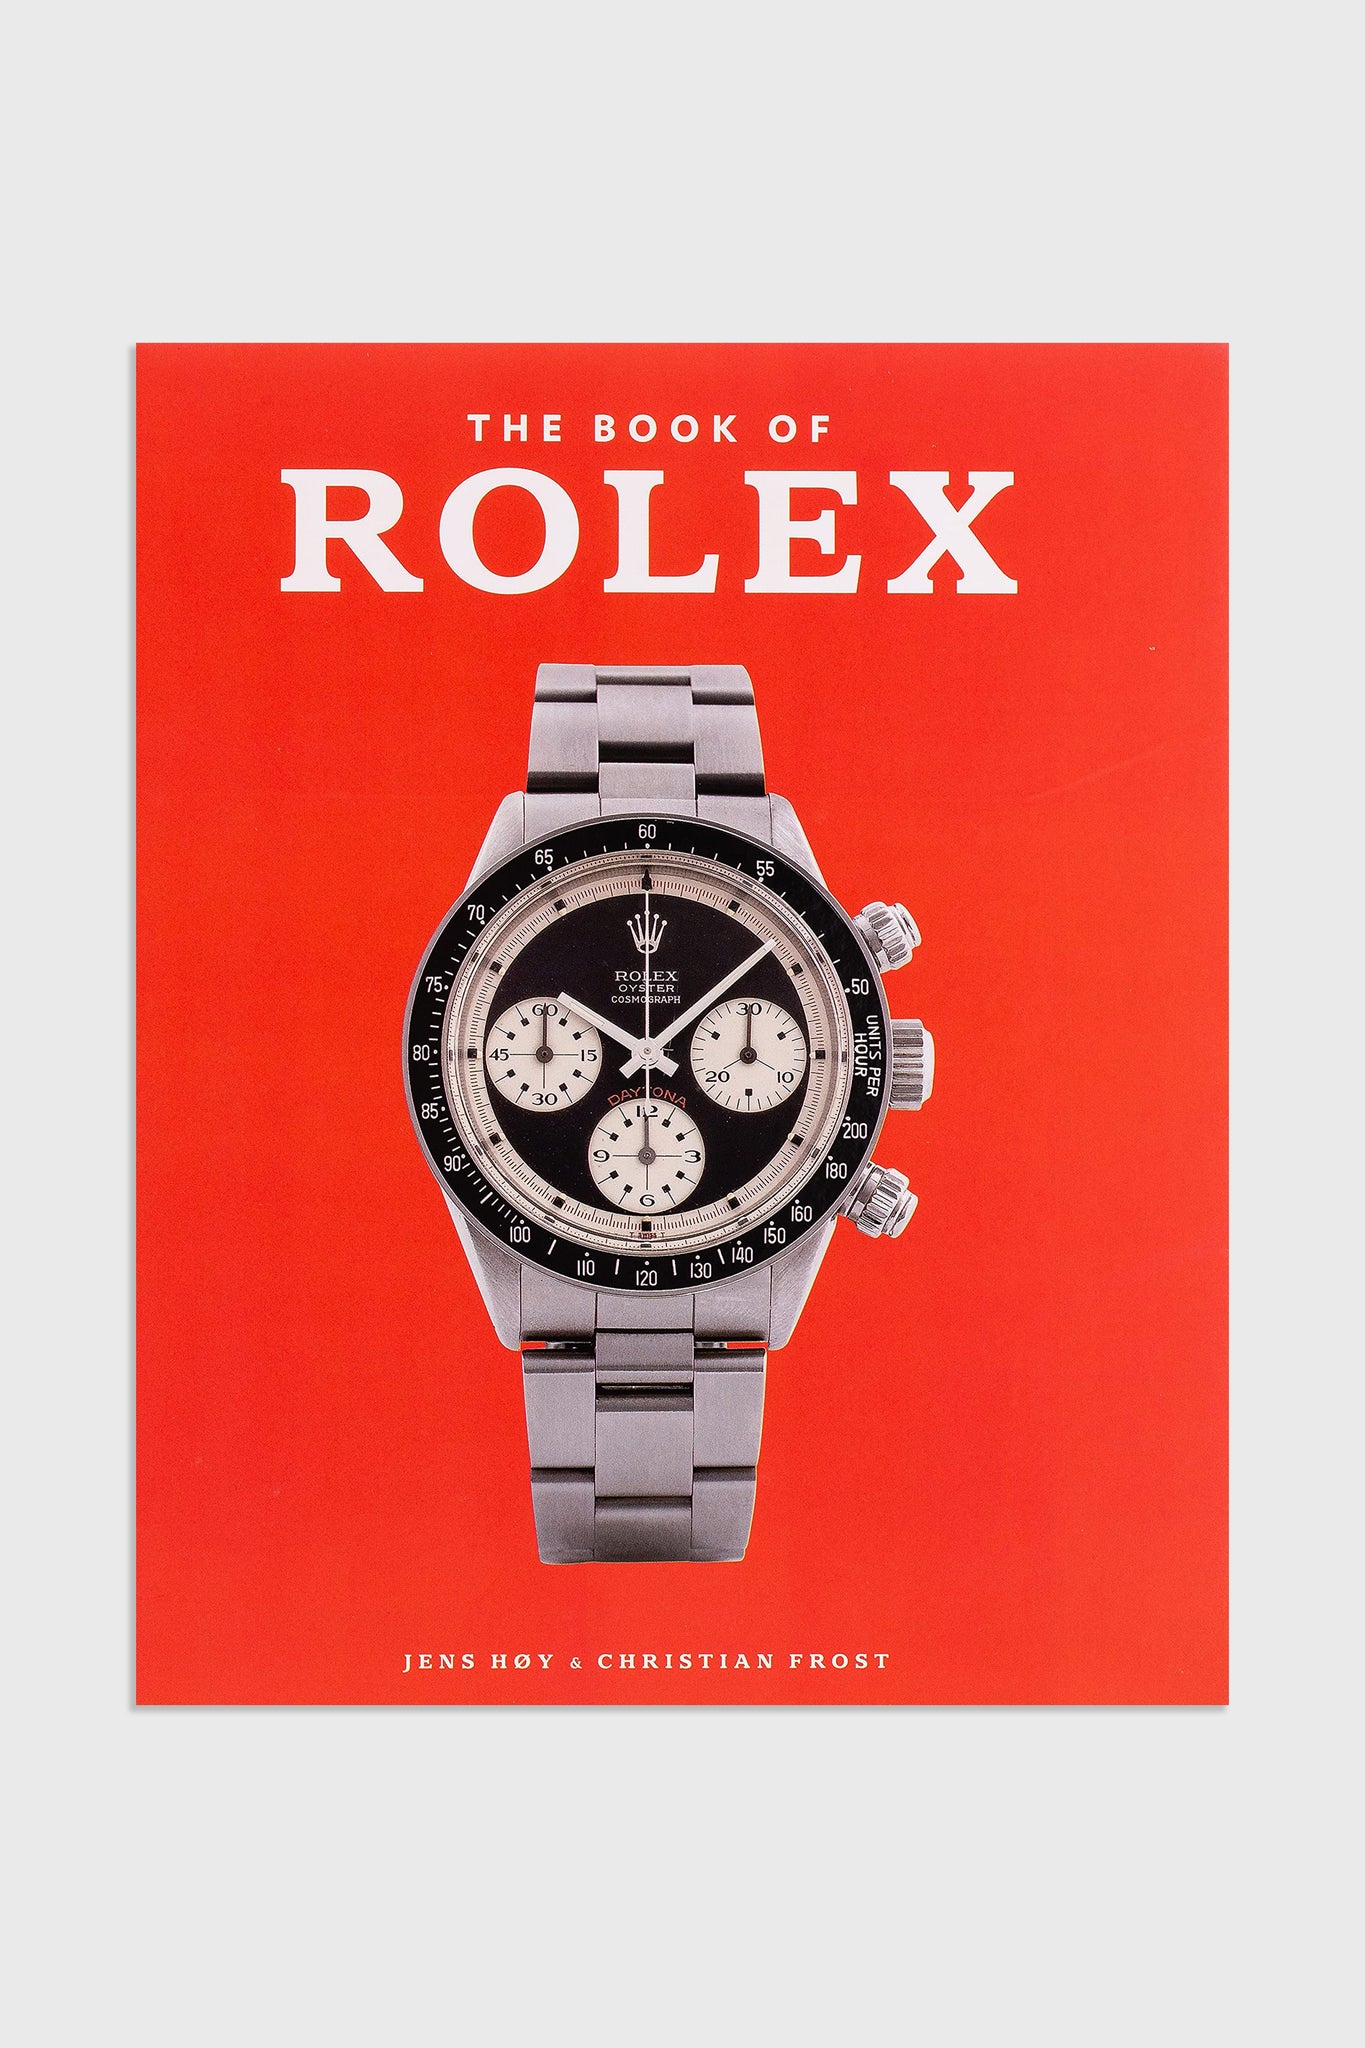 The Book of Rolex by Jens Høy